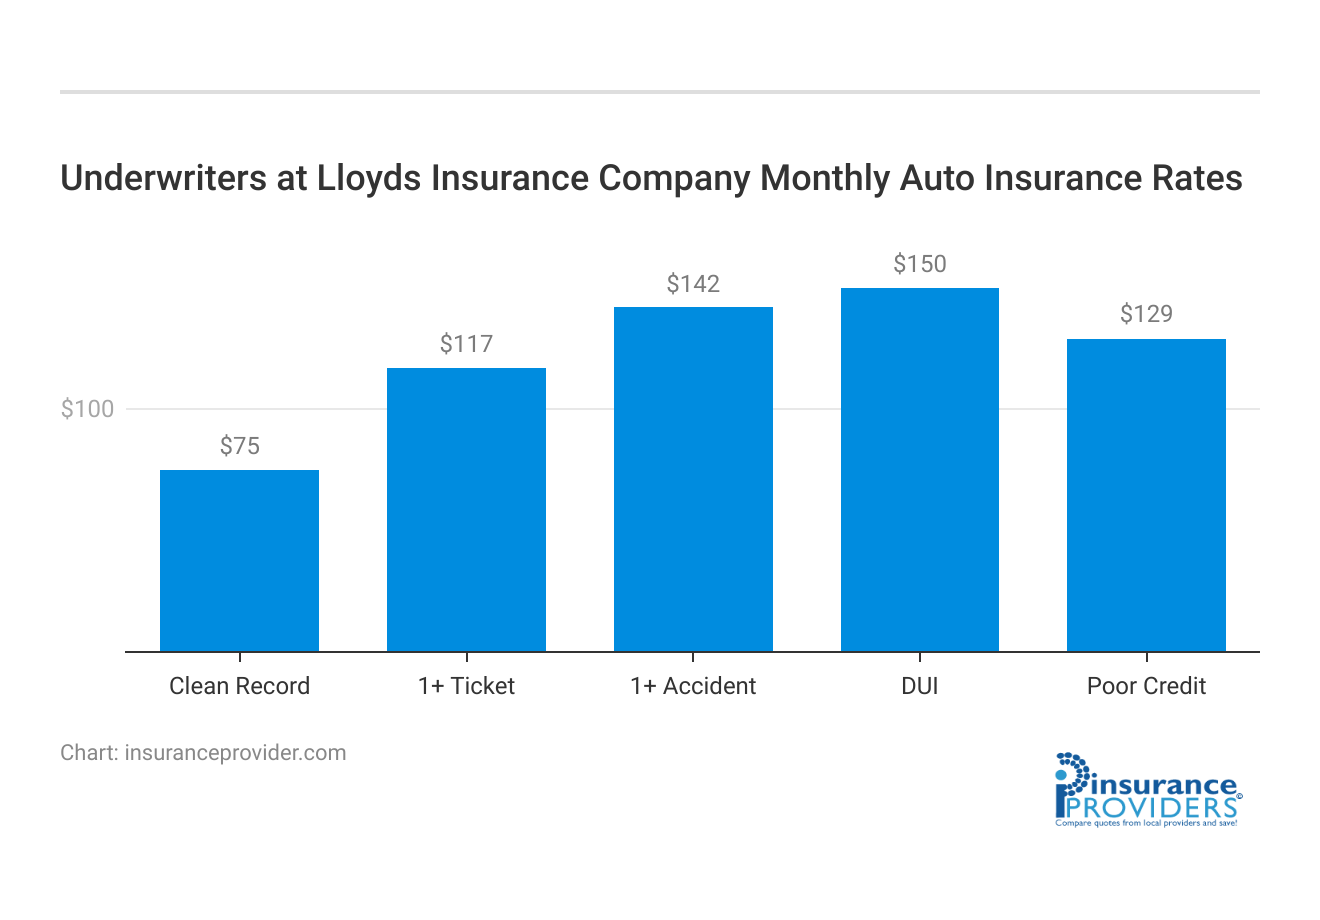 <h3>Underwriters at Lloyds Insurance Company Monthly Auto Insurance Rates</h3>